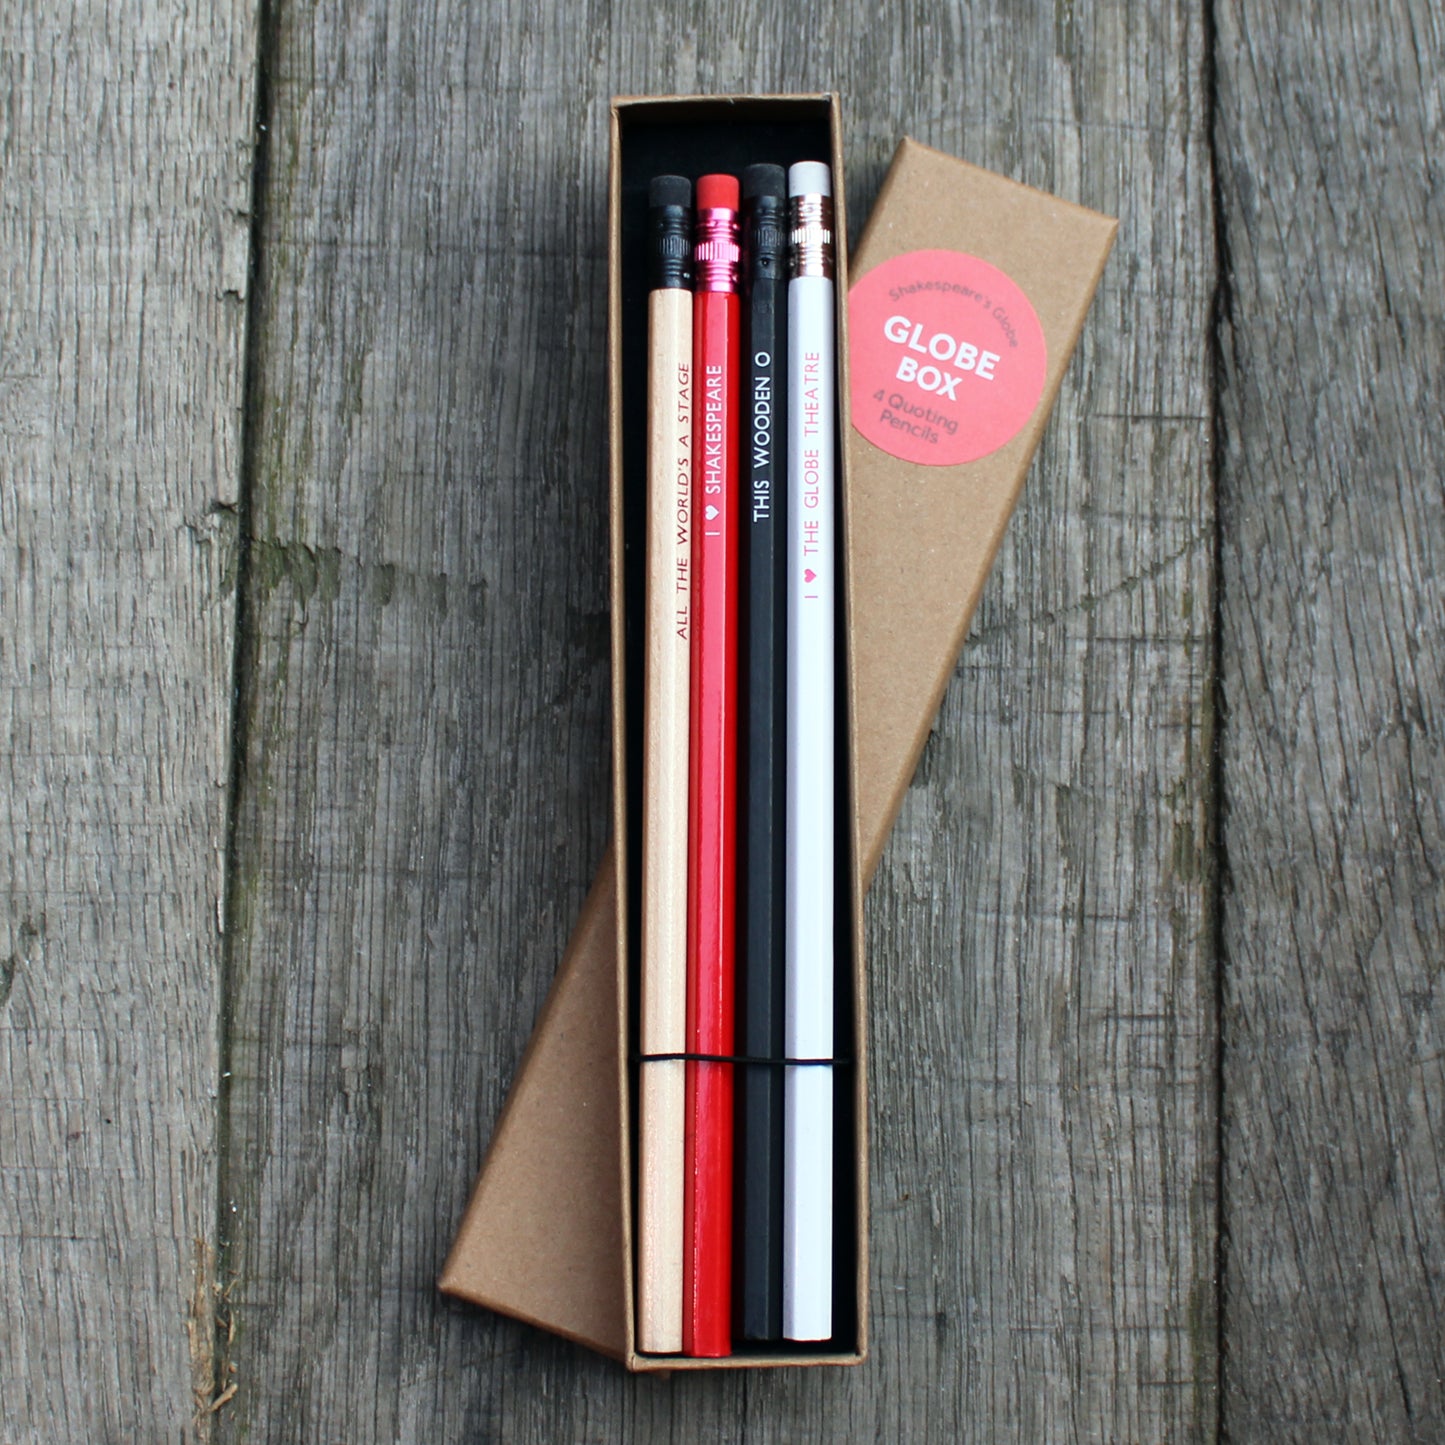 Kraft card box containing four pencils with erasers